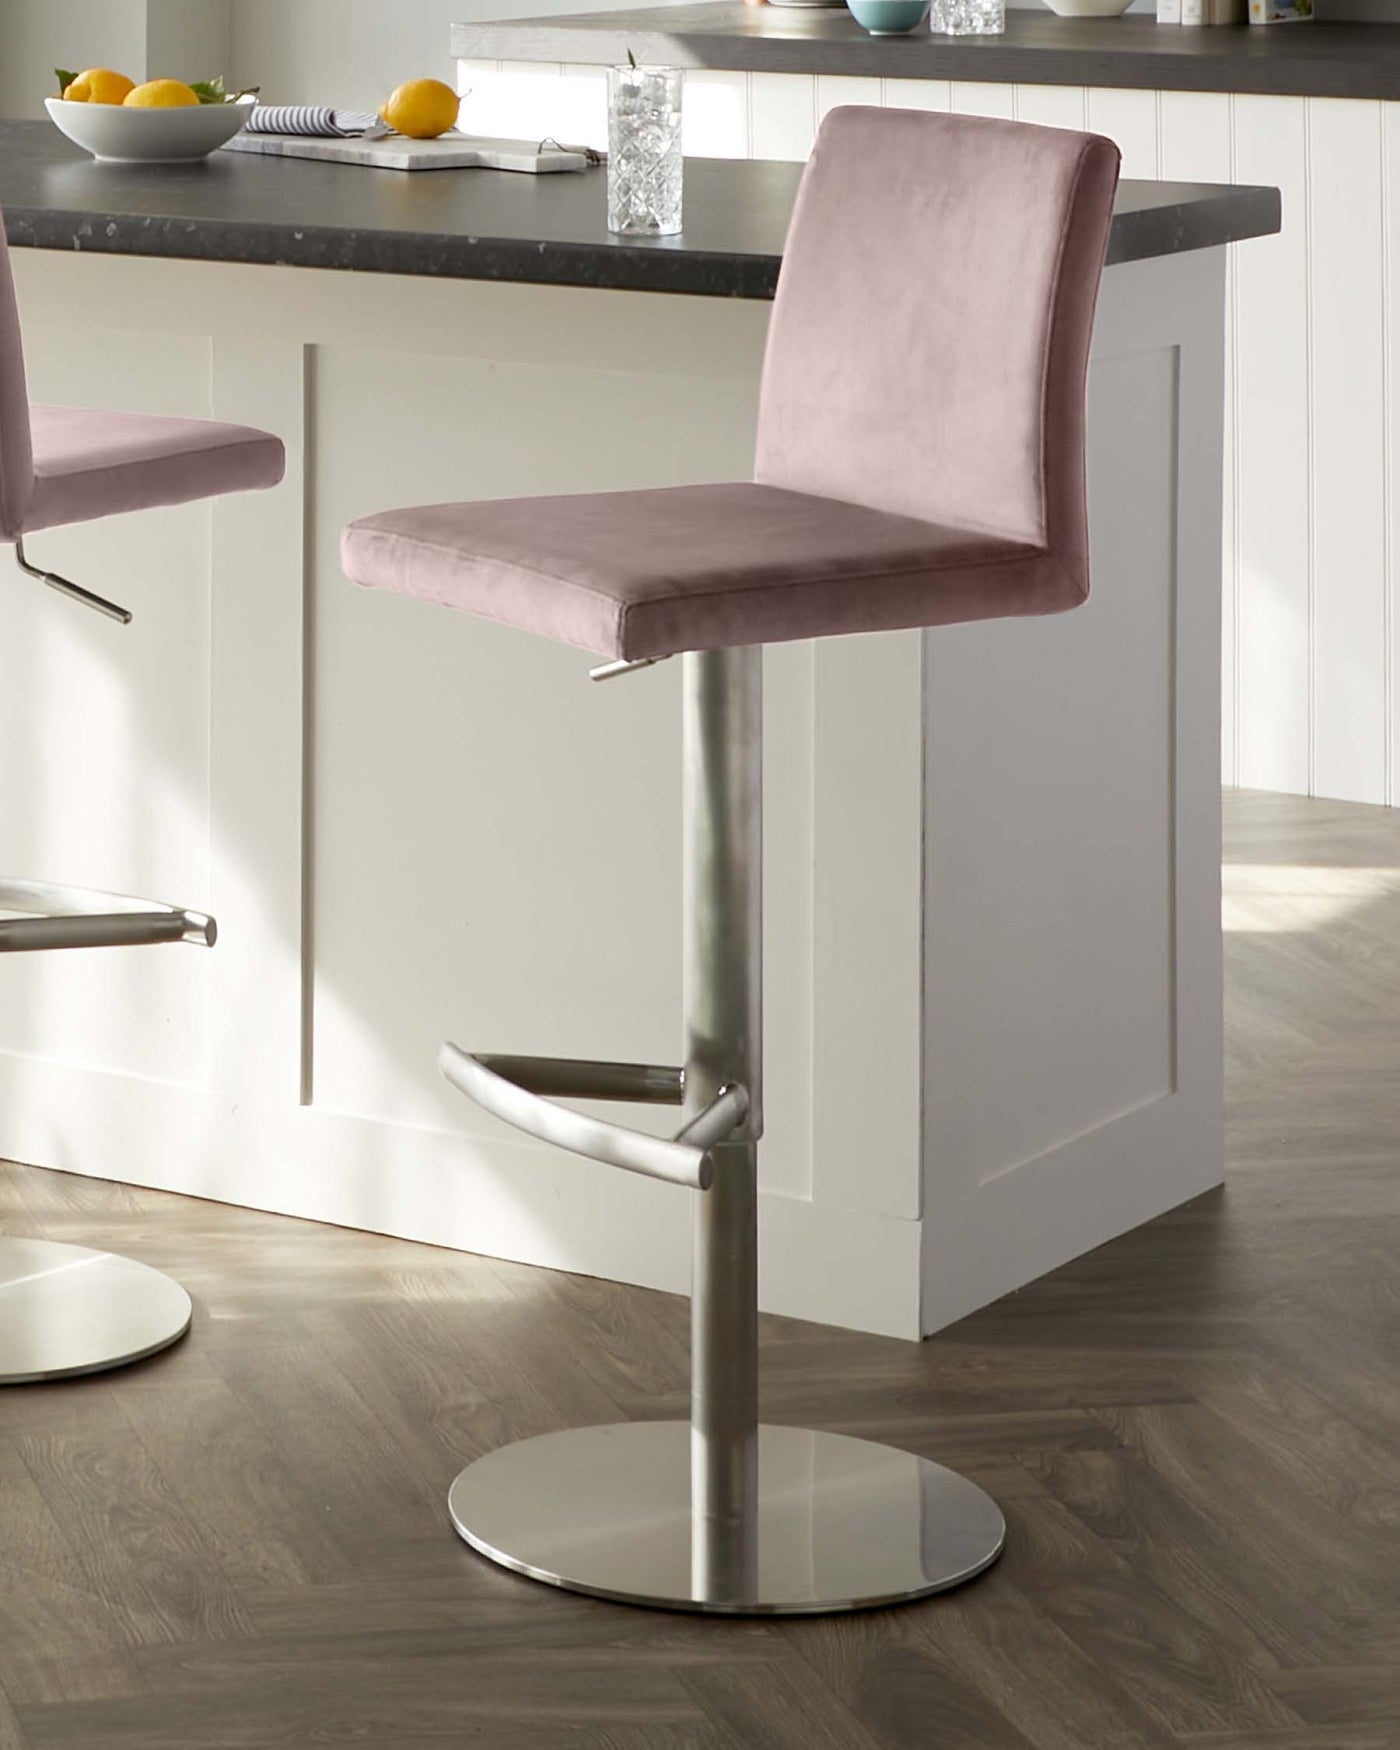 Modern adjustable-height bar stool with a smooth velvet seat in a muted pink tone, featuring a low backrest and an integrated footrest on a sleek metal pedestal base with a round, flat base plate.